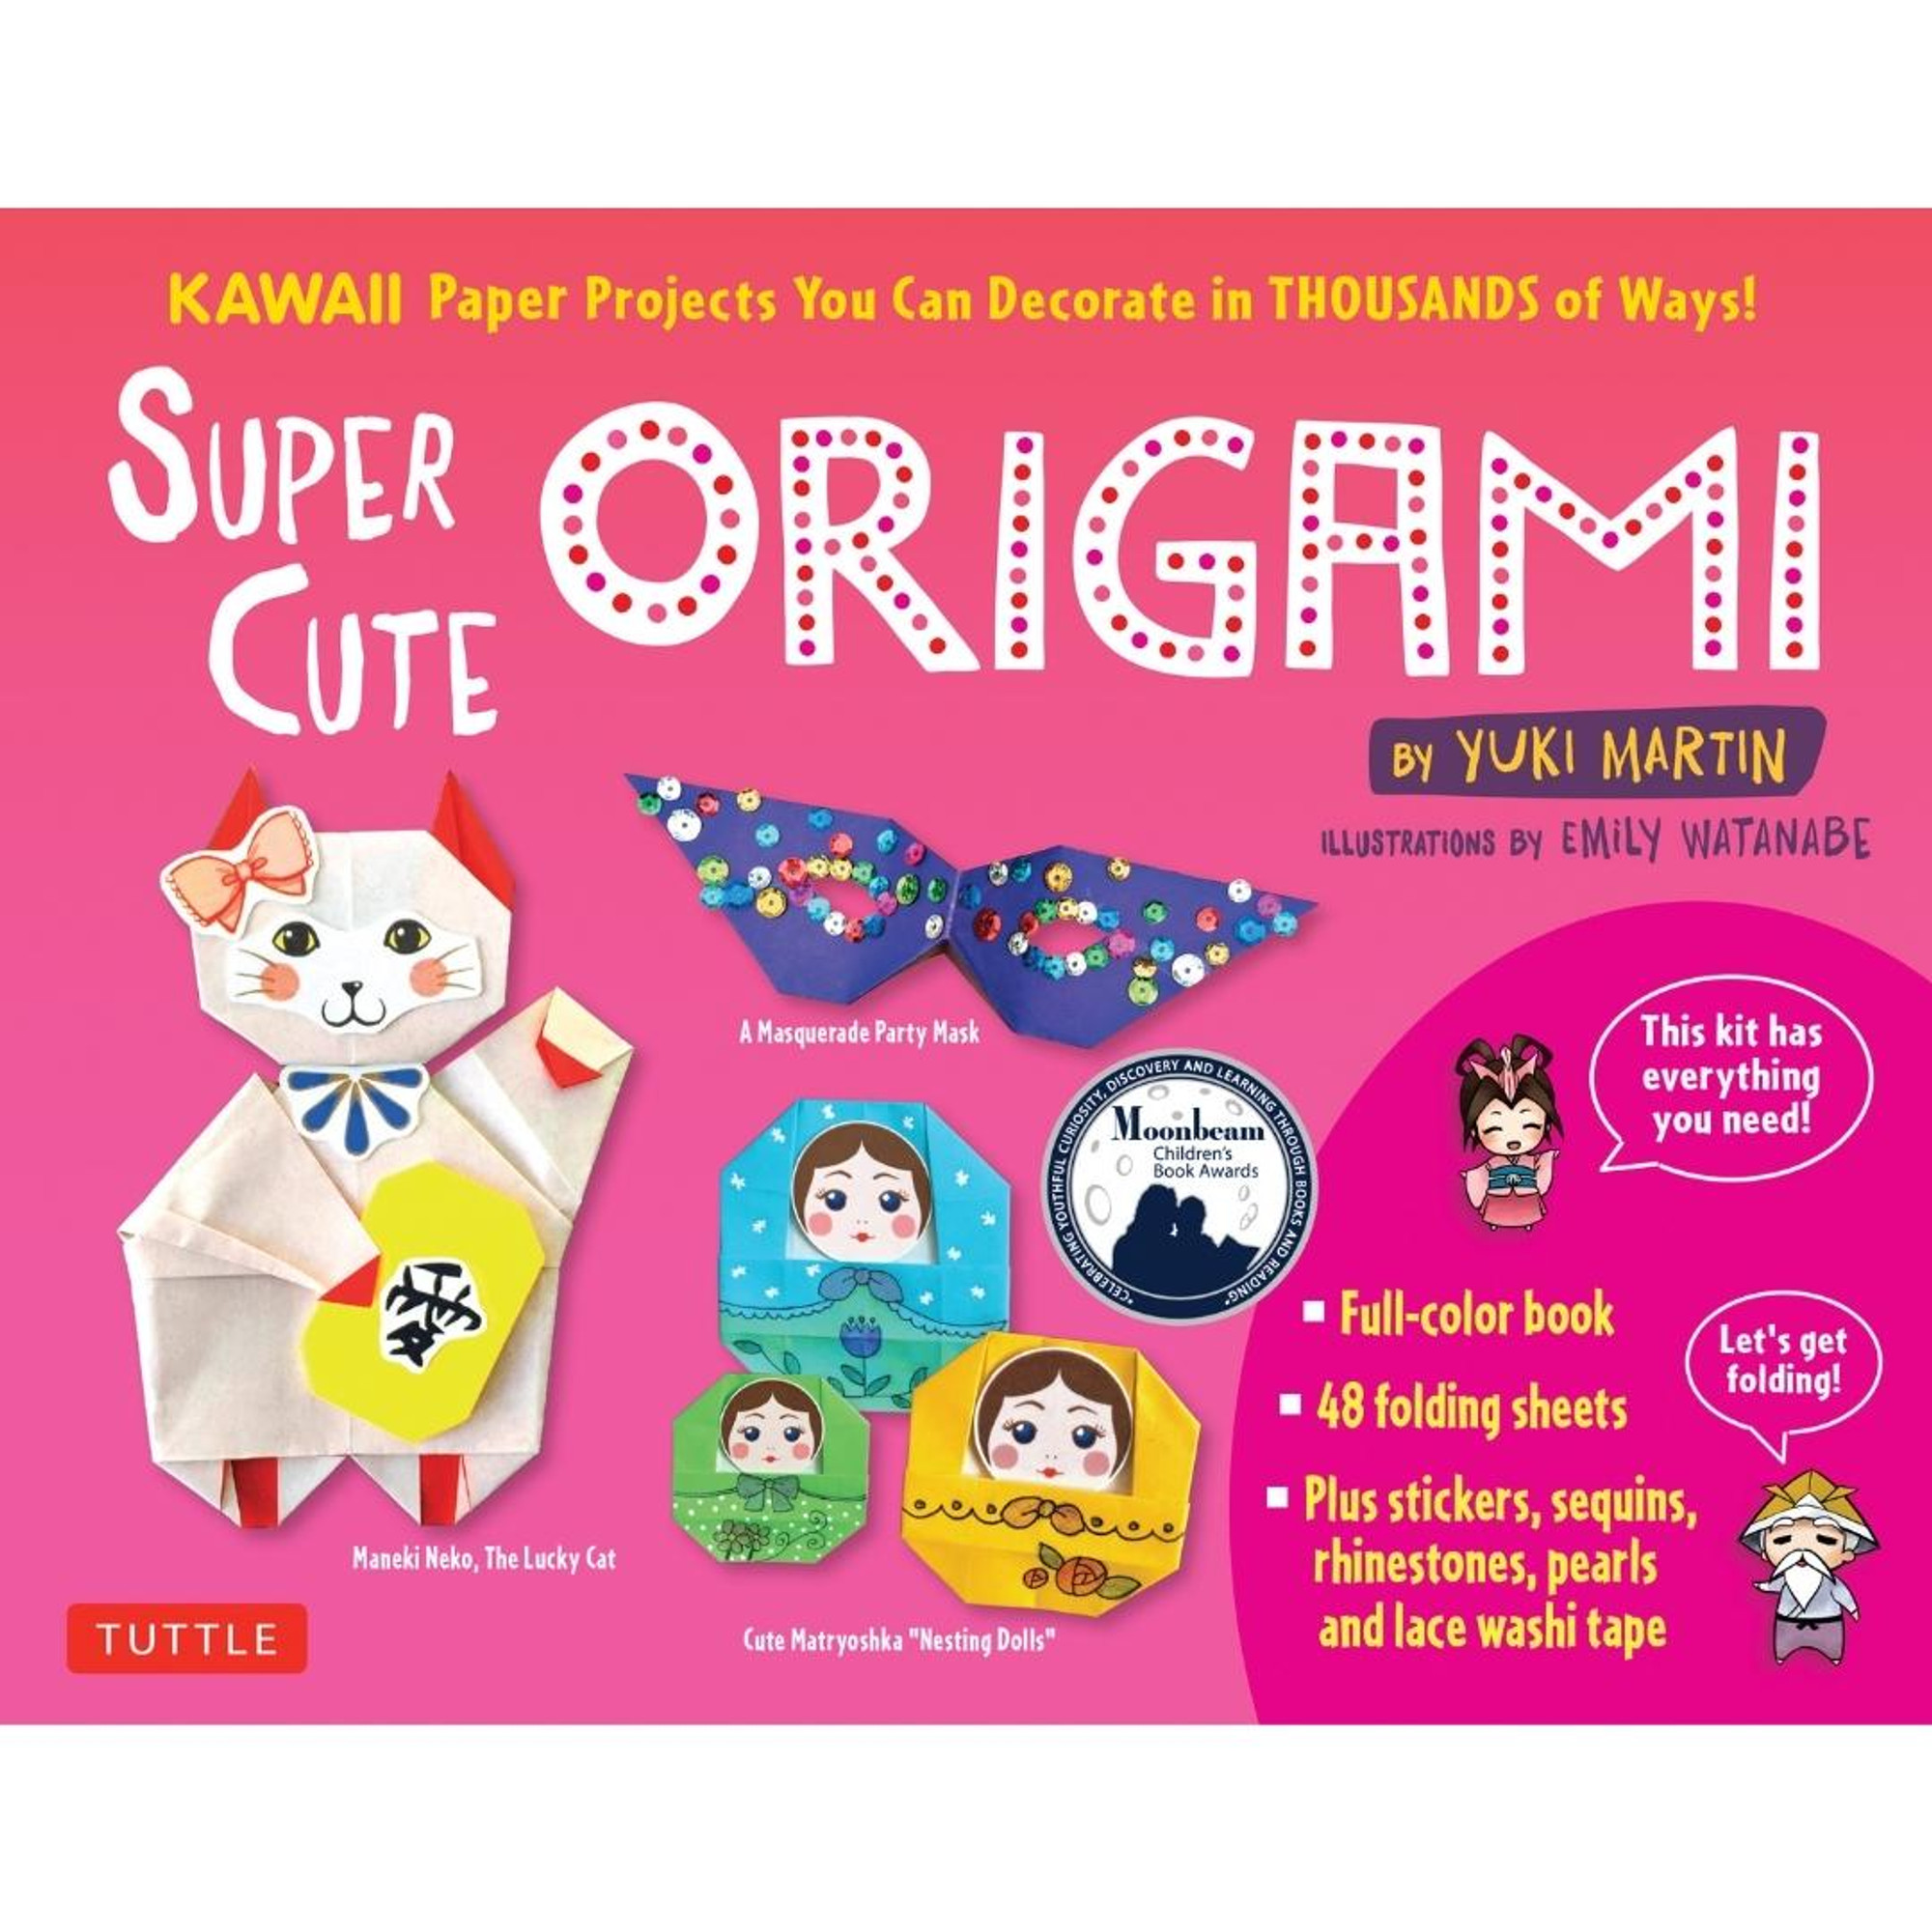  Kids Origami Paper with Stickers - 20 Sheets - 4 Paper Designs  - Includes Instructions for Swan Design - Premium Quality Paper with Fun  Patterns & Colors - DIY - Arts & Crafts : אמנות, יצירה ותפירה